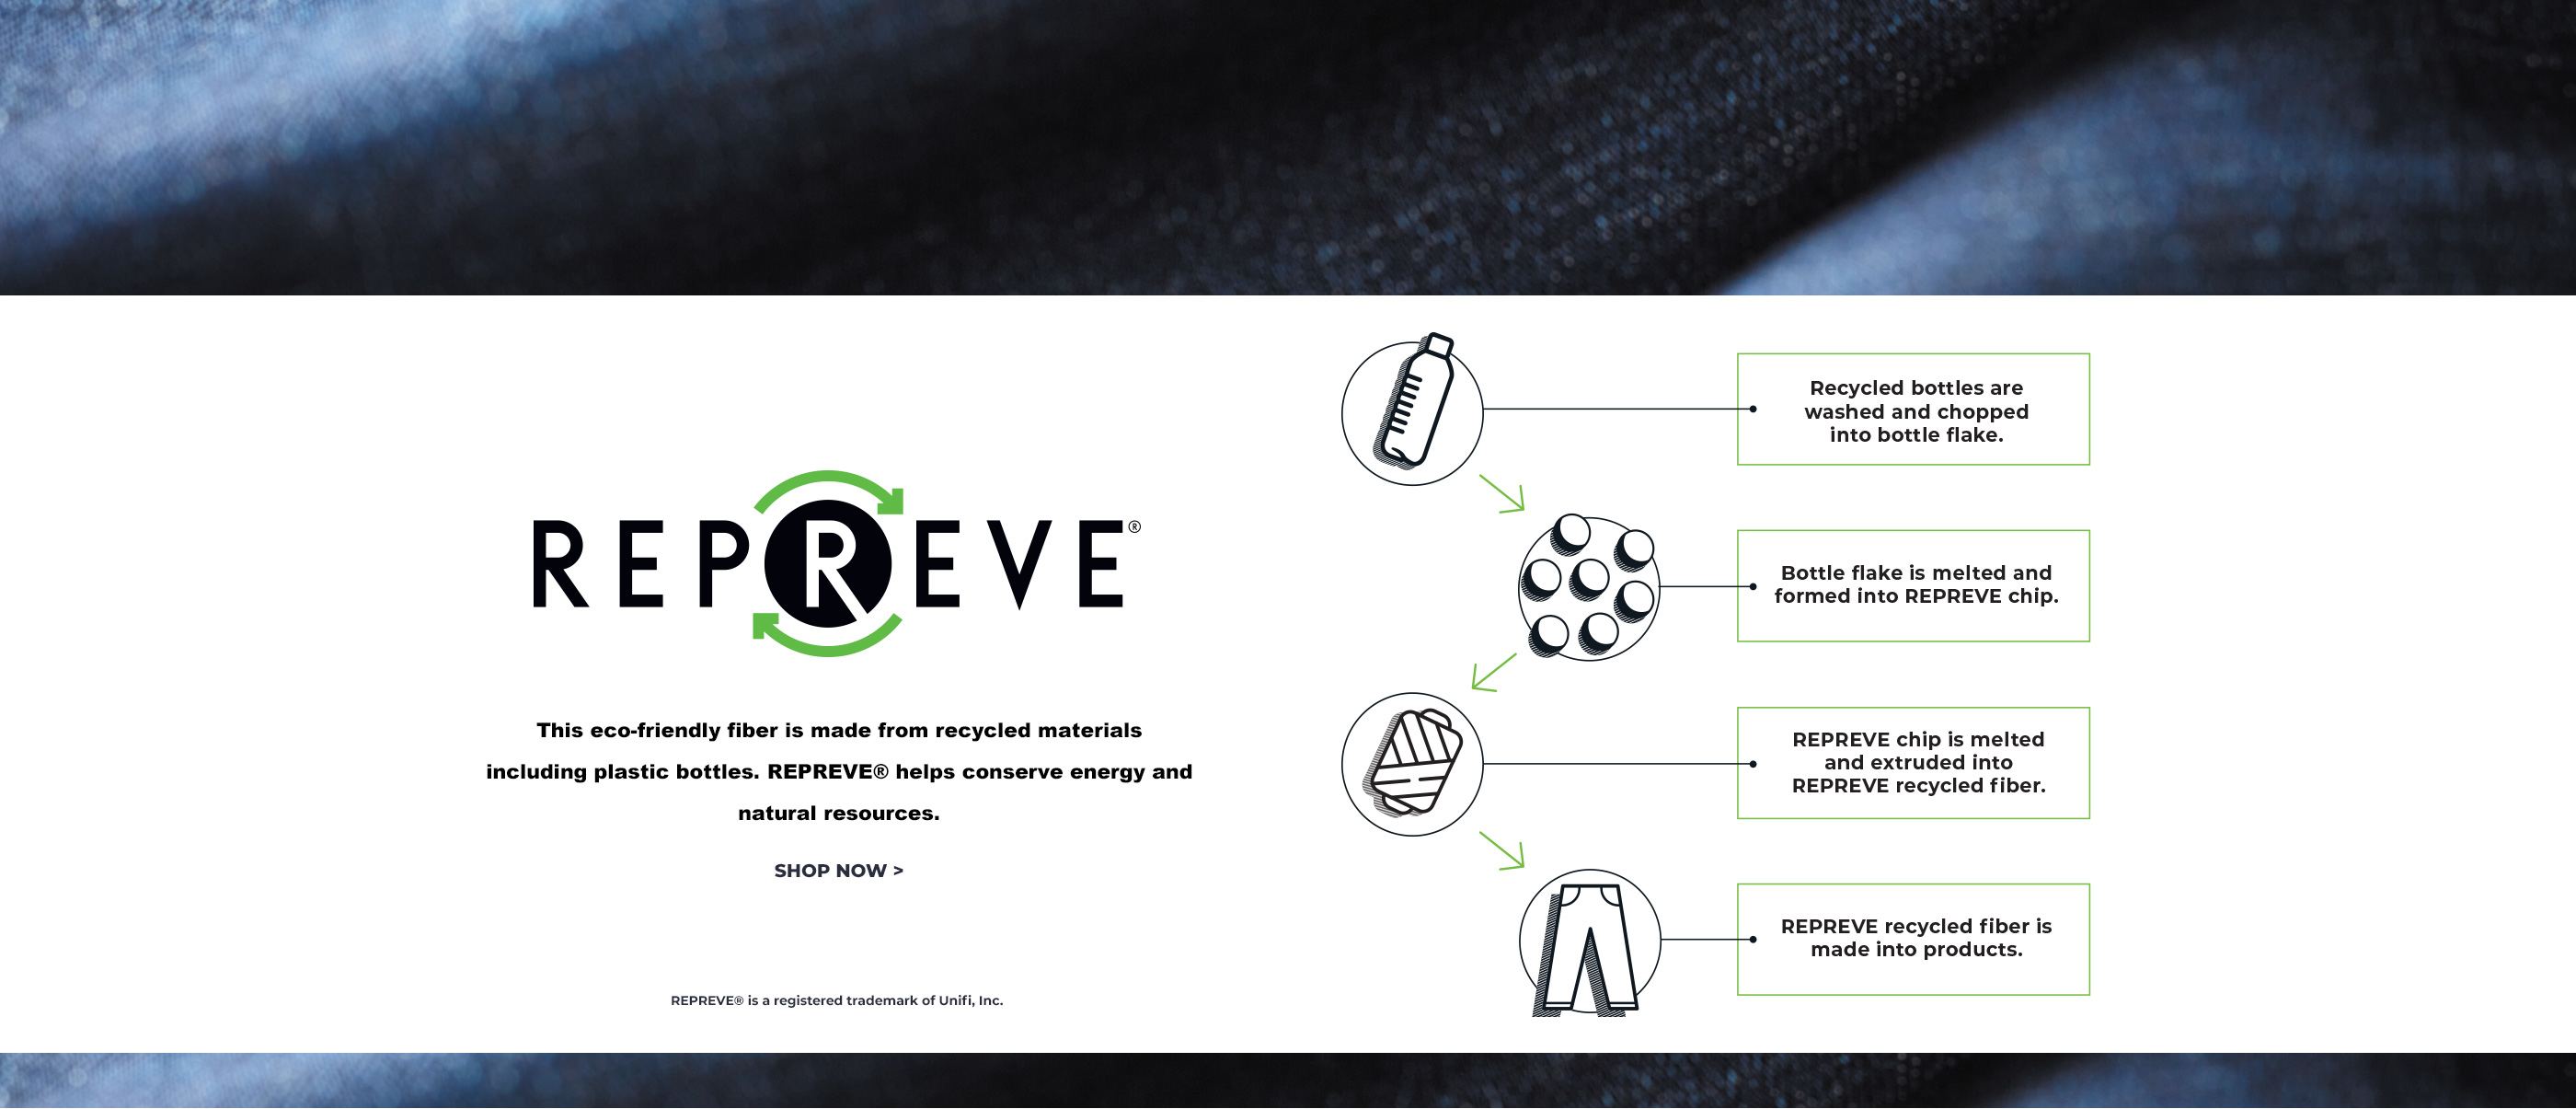 Repreve - This eco-friendly fiber is made from recycled materials including plastic bottles. REPREVE helps conserve energy and natural resources. Shop Now.